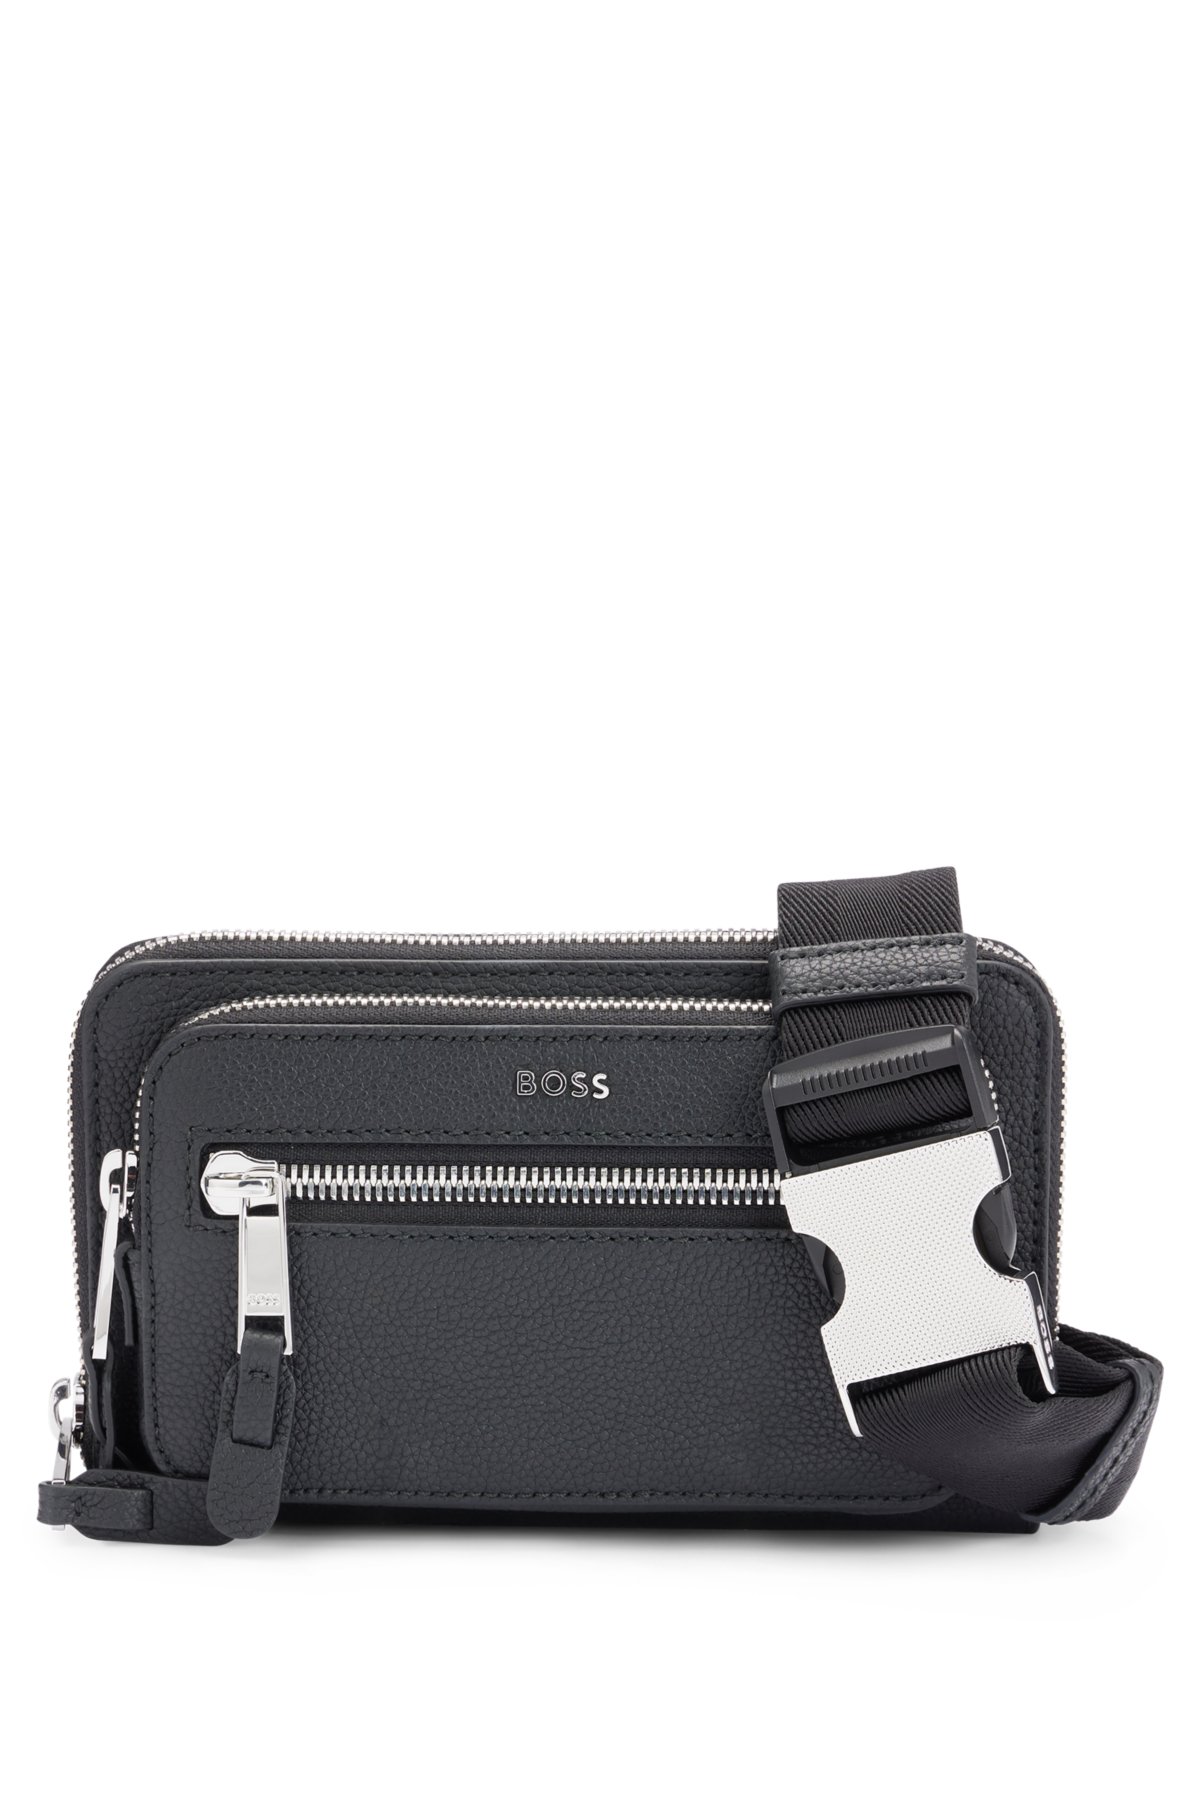 BOSS - Crossbody bag in grained leather with logo lettering